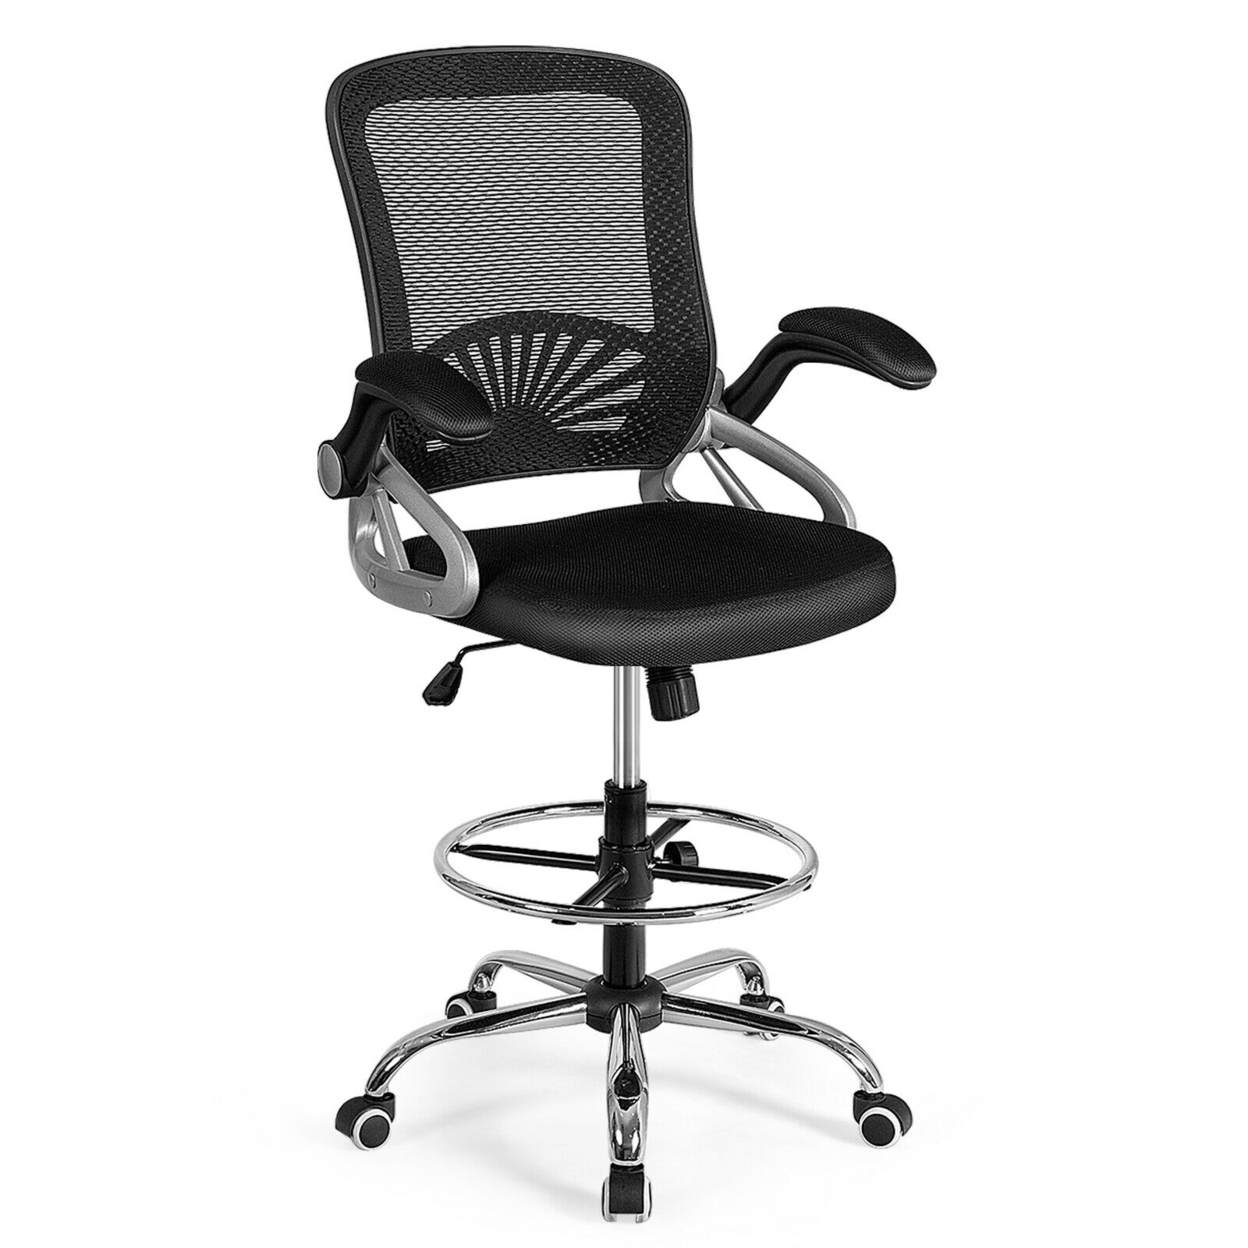 Mesh Drafting Chair Mid Back Office Chair Adjustable Height Flip-Up Arm Black